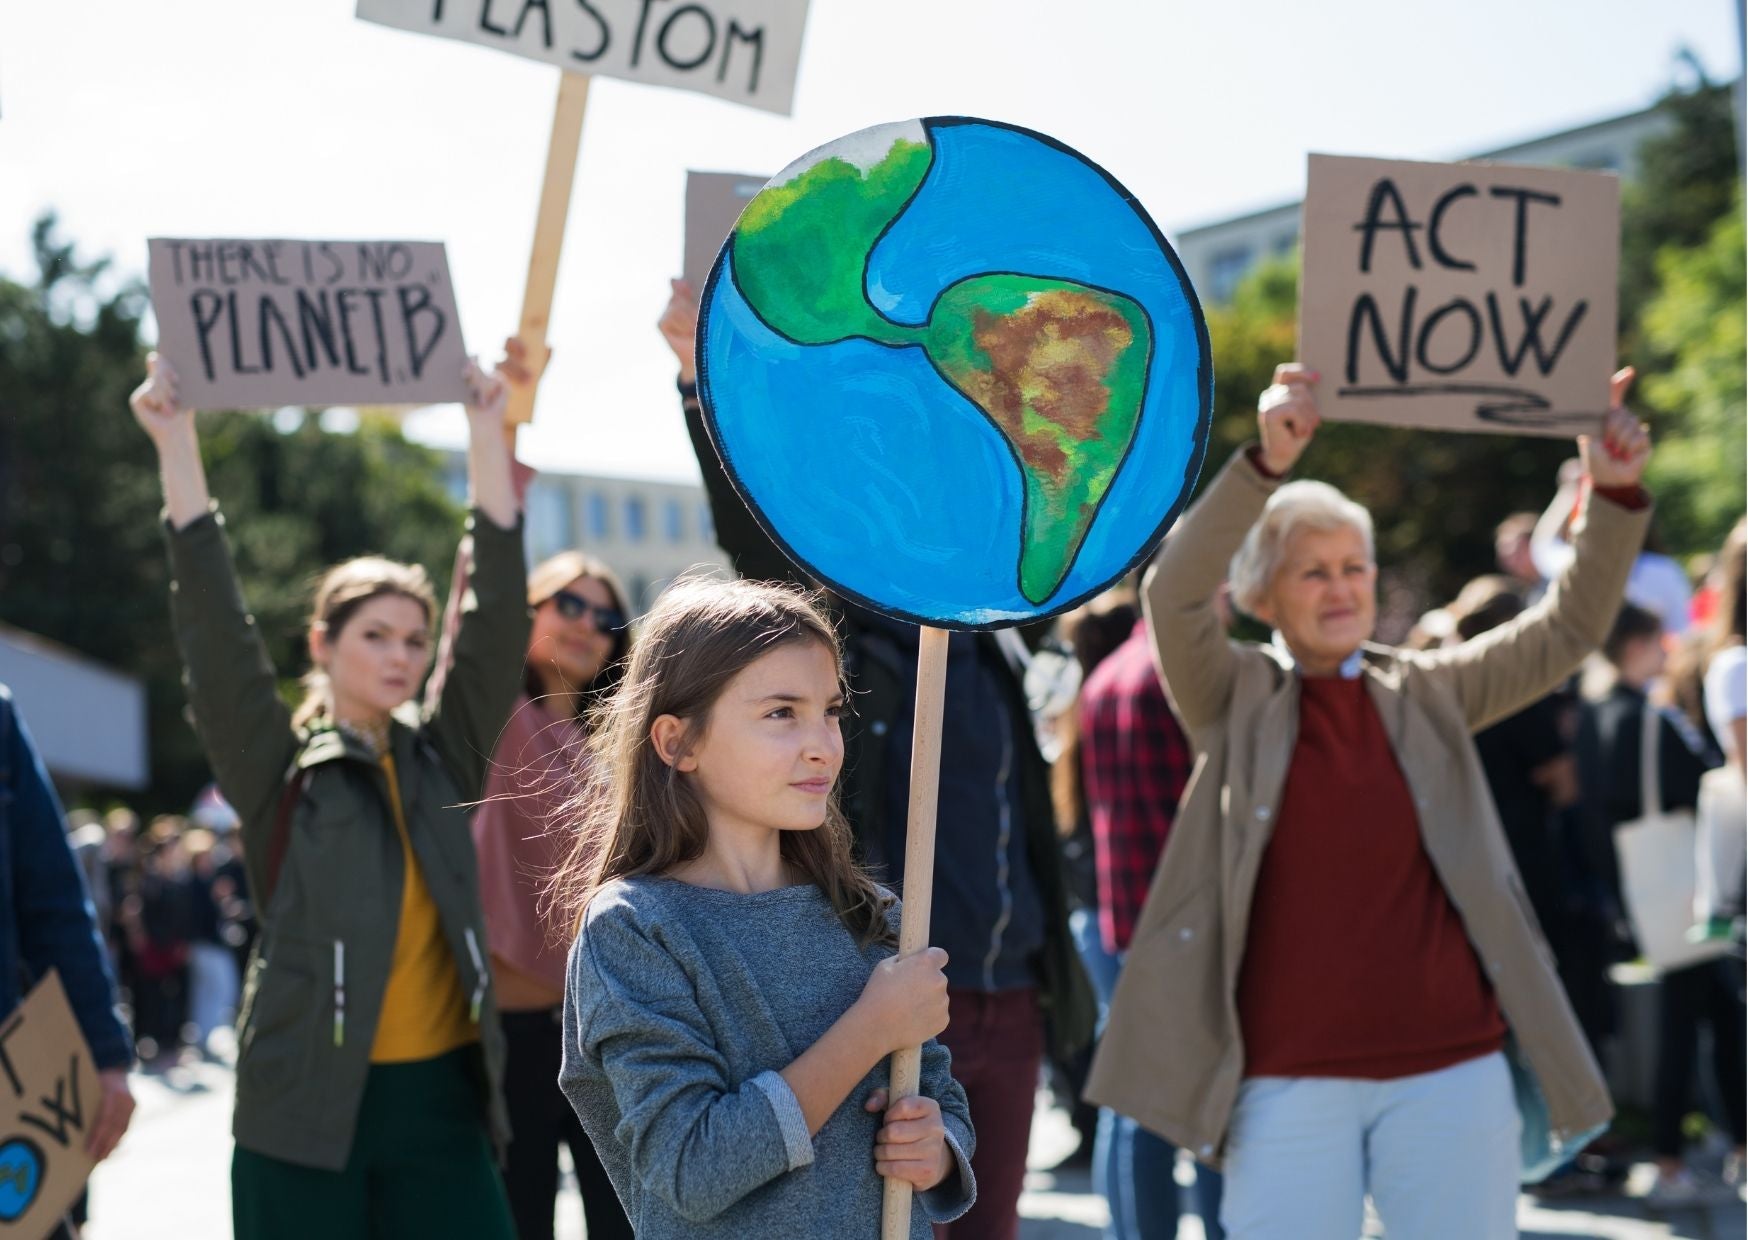 How to Stop Global Warming, Solutions to Prevent Climate Change | SR Mailing Ltd